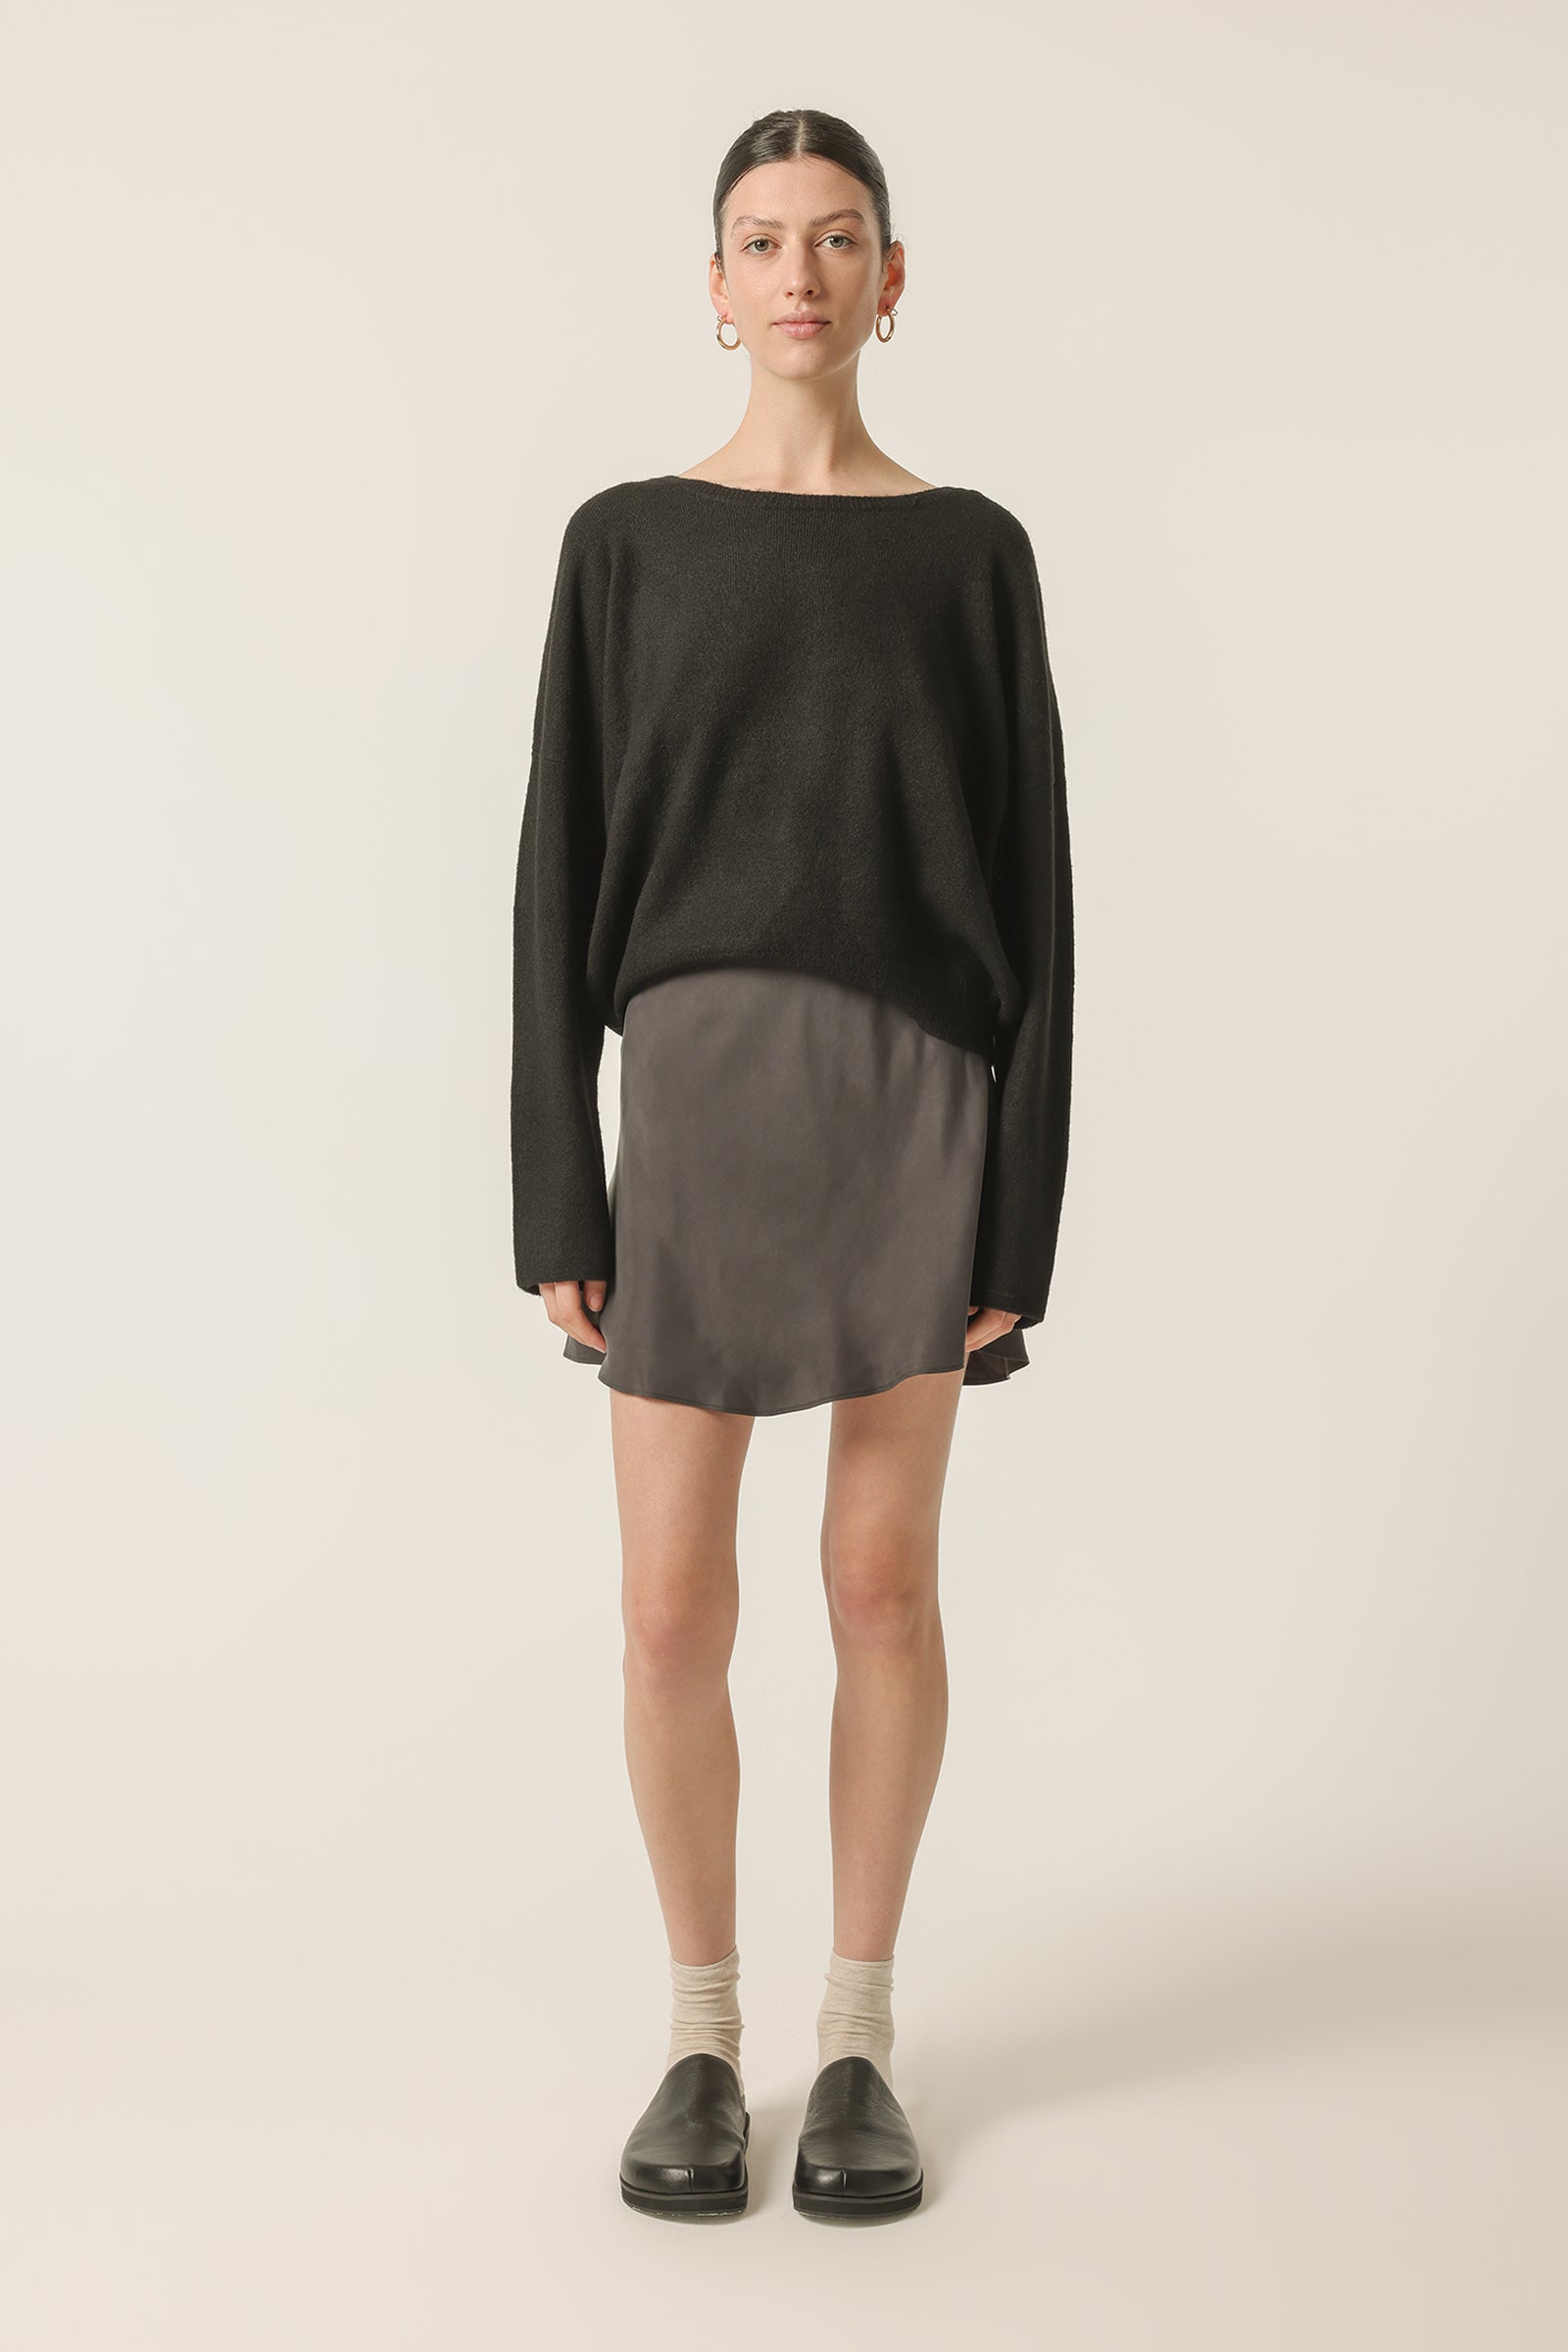 Nude Lucy Reese Cupro Mini Skirt In A Dark Grey In A Brown Coal Colour 